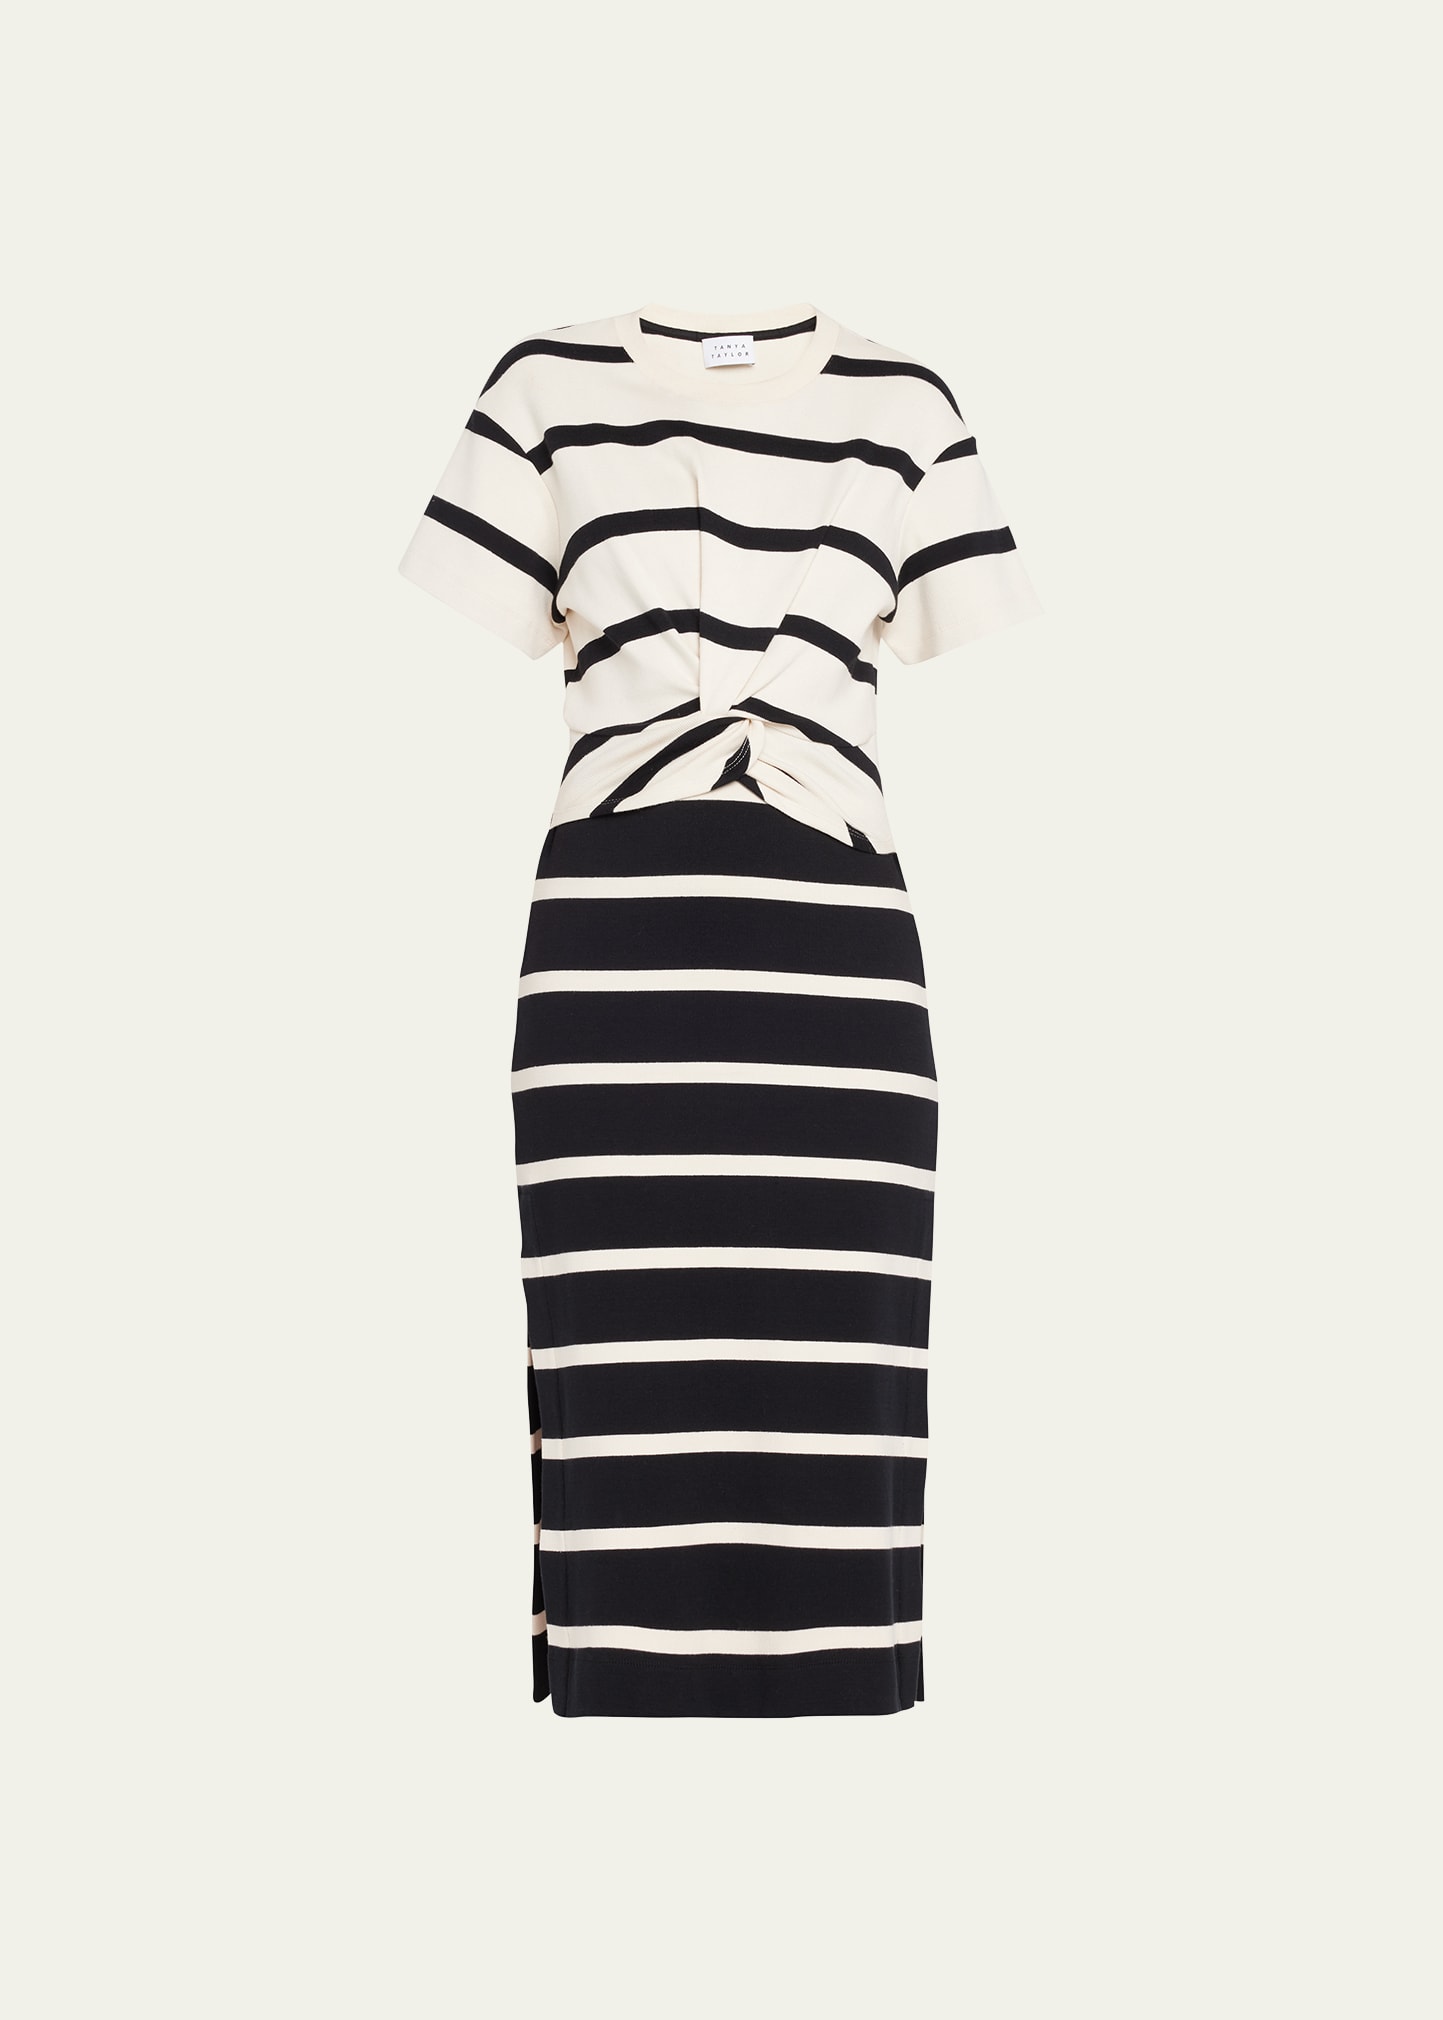 Tanya Taylor Willow Striped Twisted-front Midi Dress In Cream Black